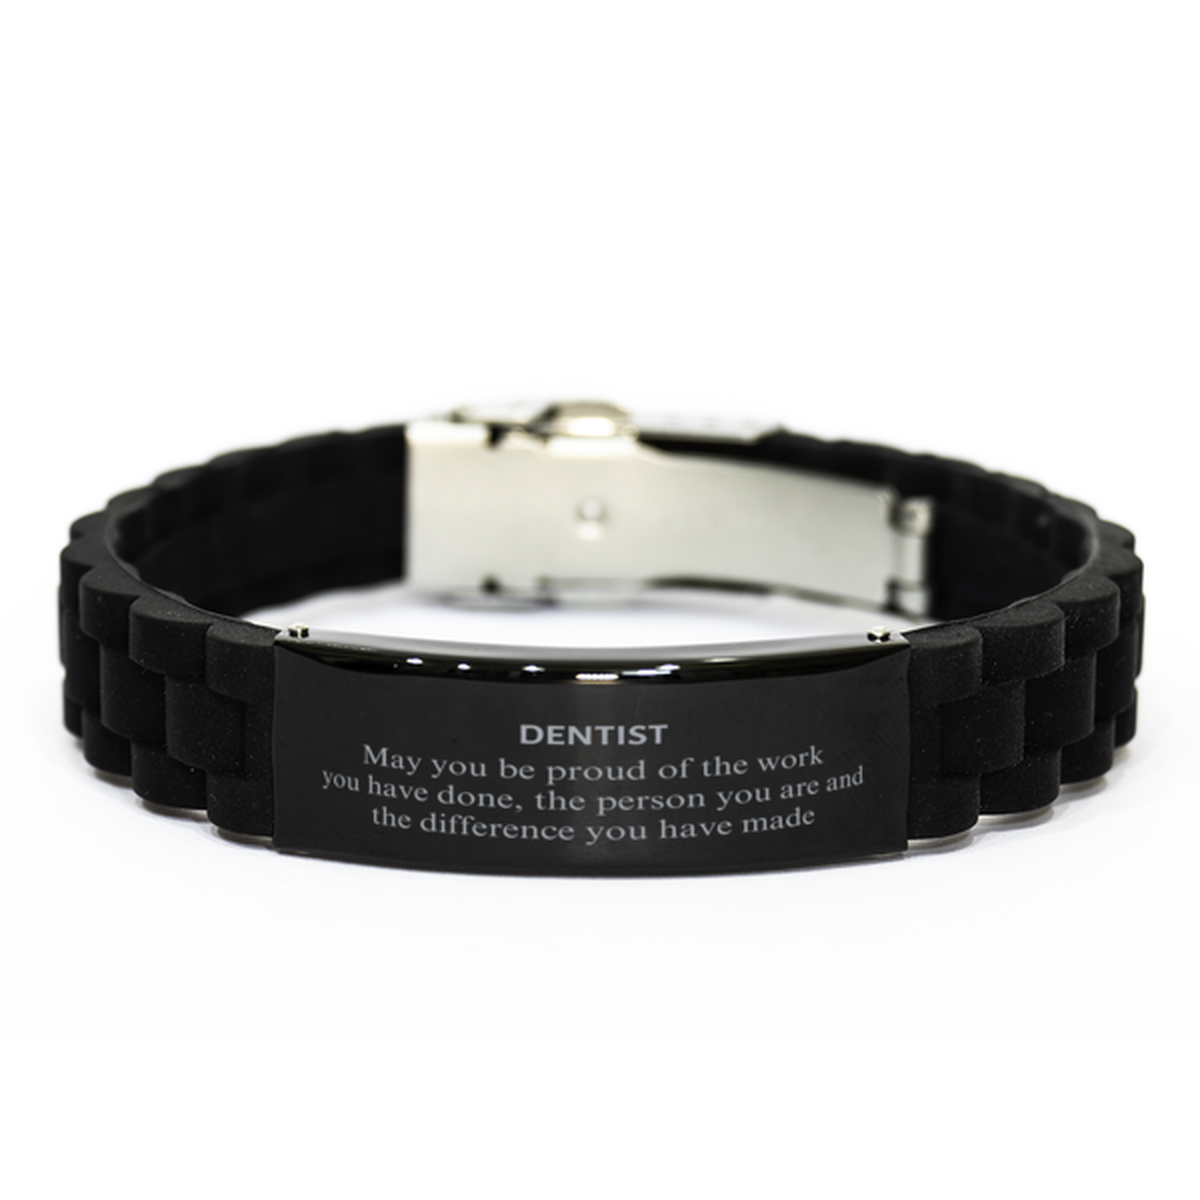 Dentist May you be proud of the work you have done, Retirement Dentist Black Glidelock Clasp Bracelet for Colleague Appreciation Gifts Amazing for Dentist